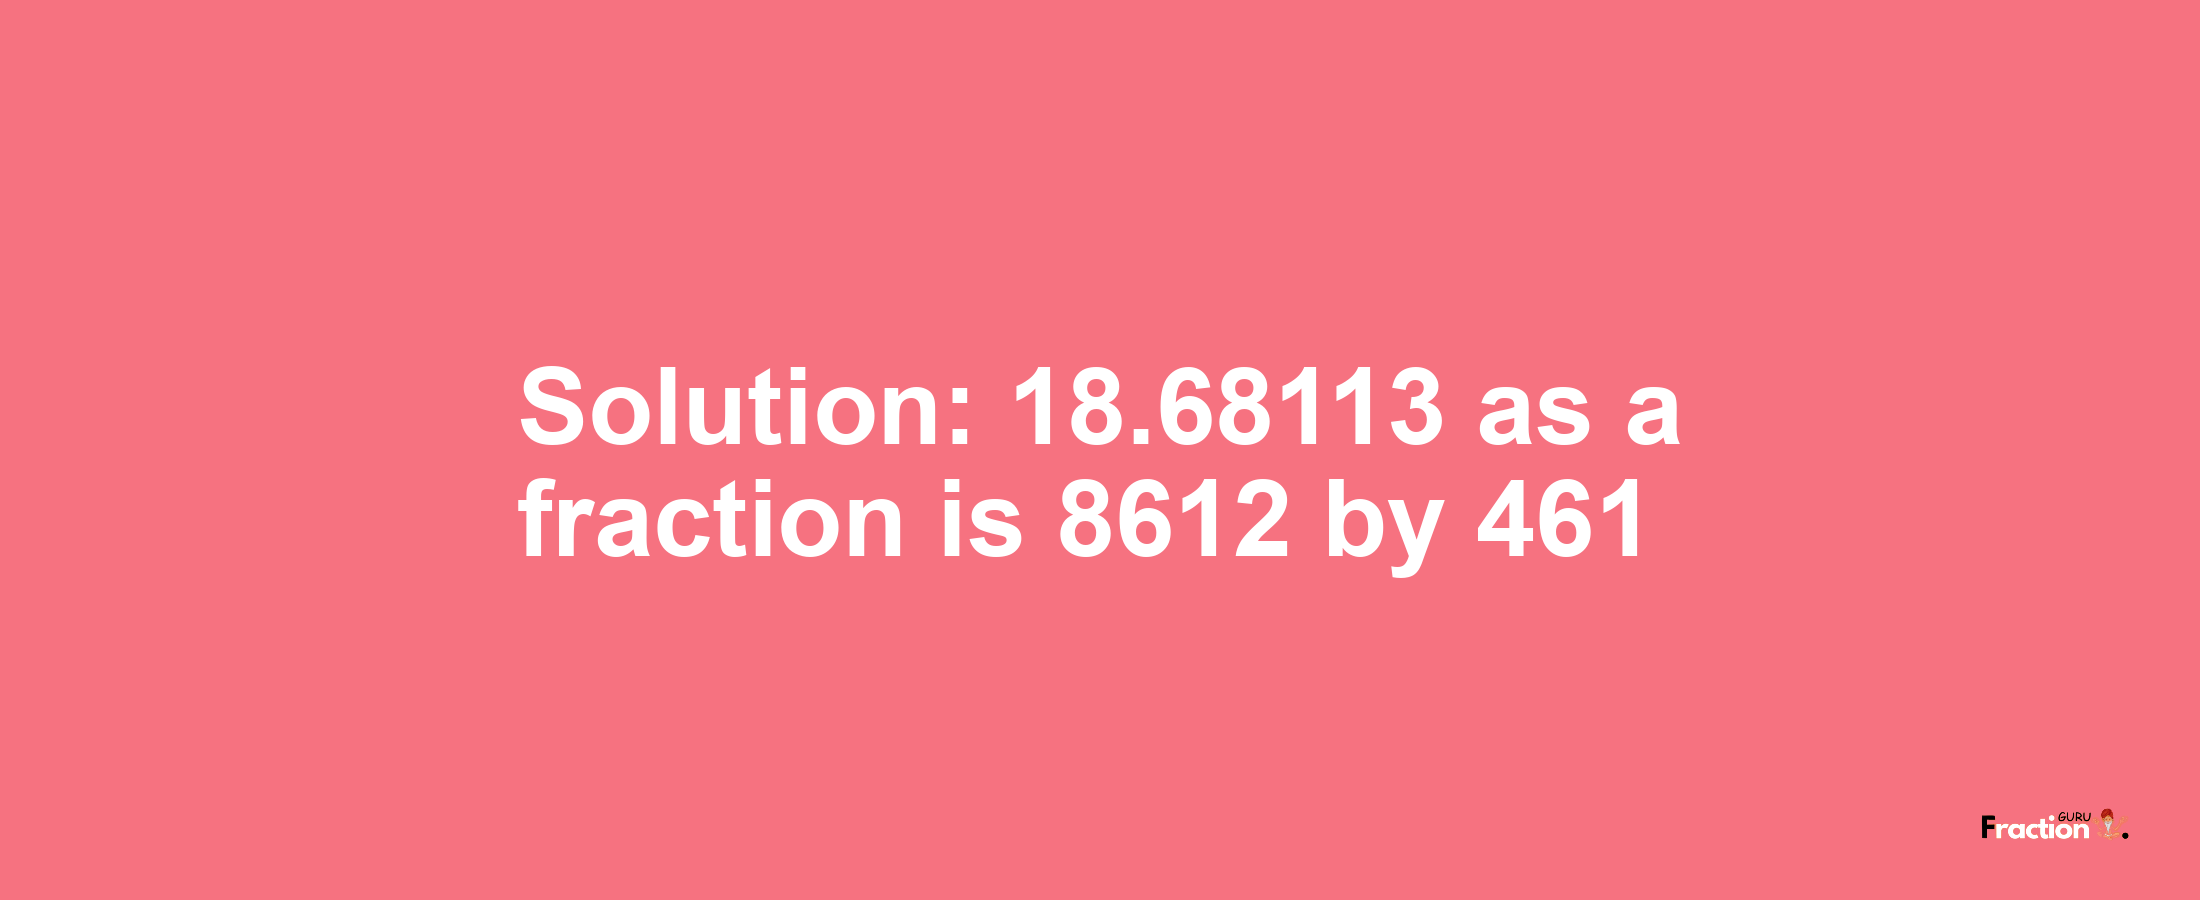 Solution:18.68113 as a fraction is 8612/461